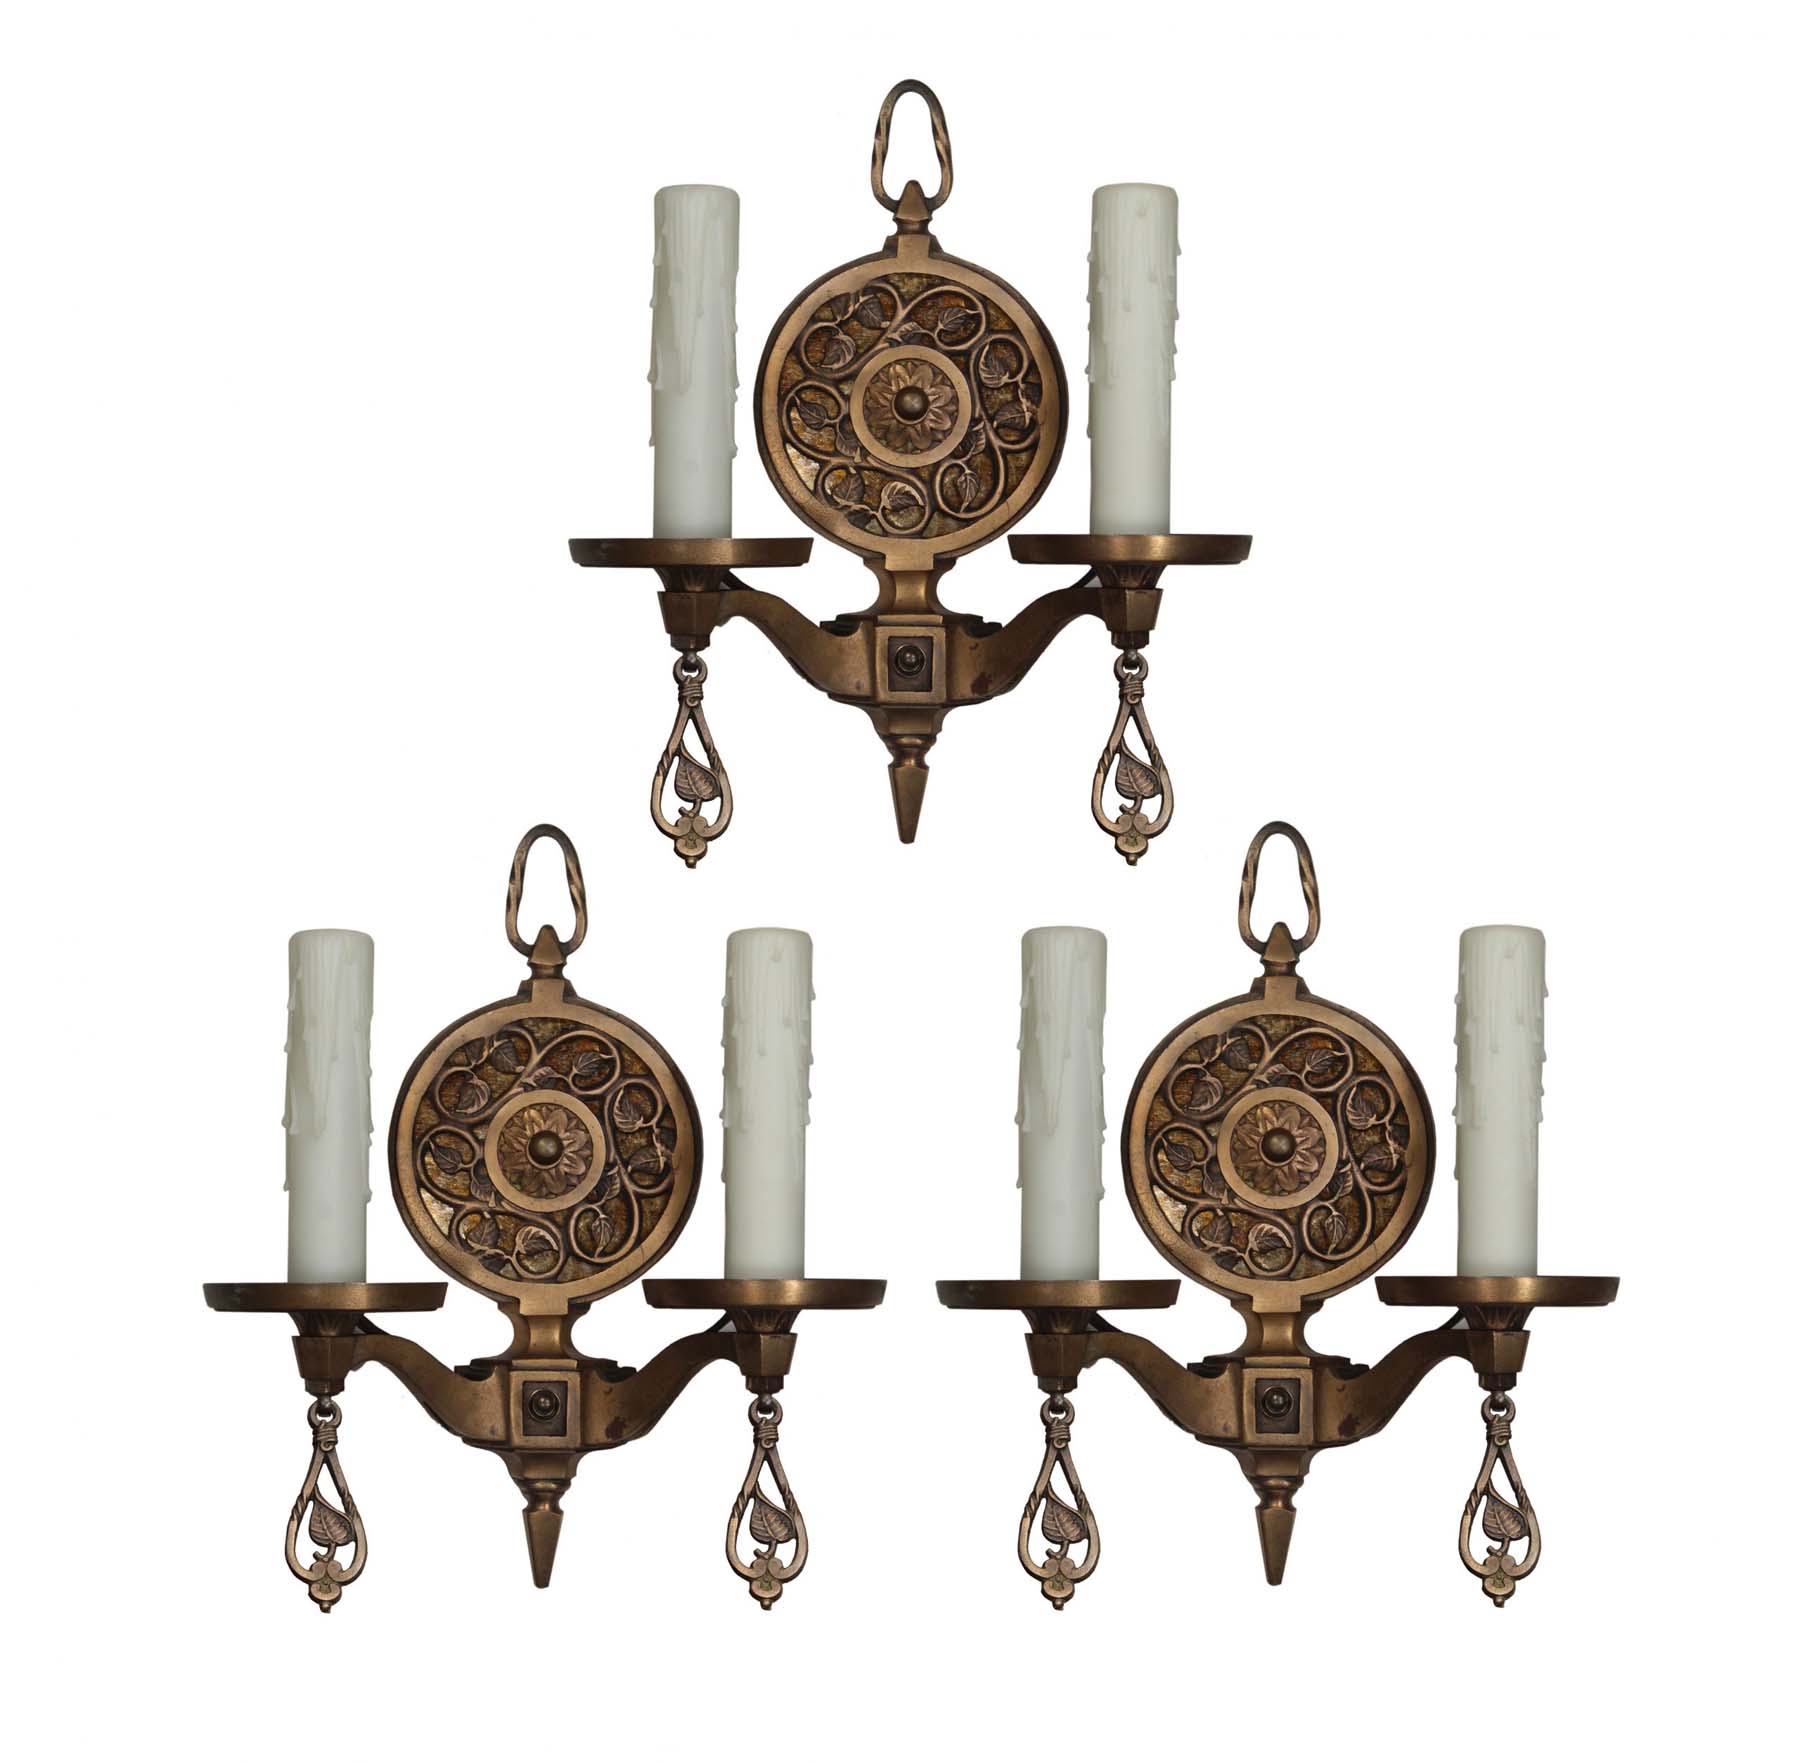 SOLD Matching Antique Cast Bronze Sconces with Mica, c. 1920s -0